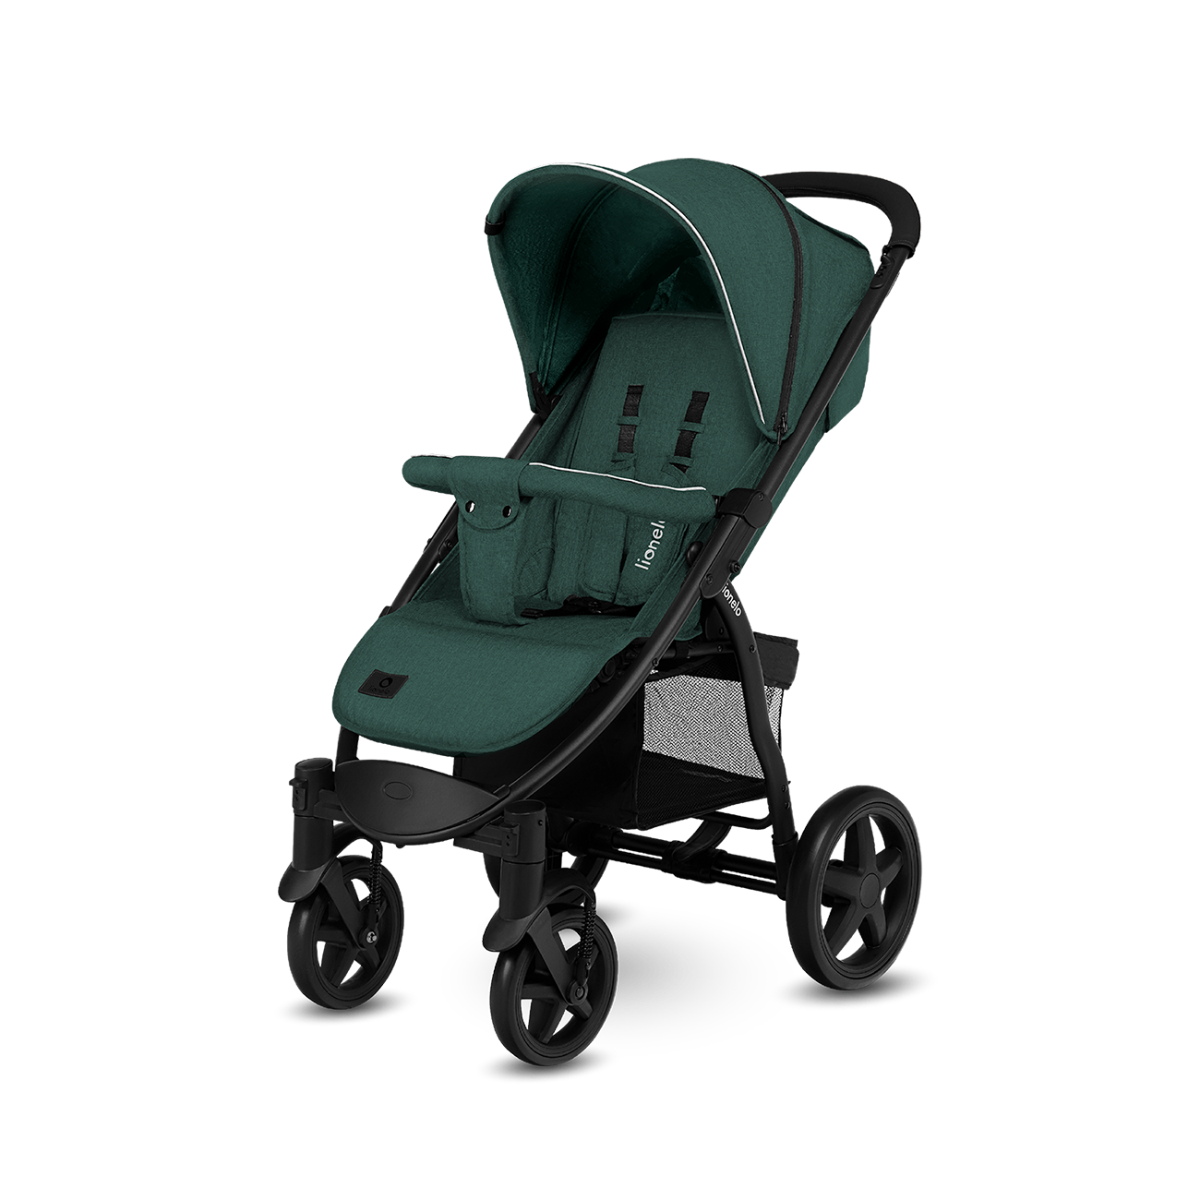 Lionelo Annet Plus Green Forest Baby Compact Stroller Kids Buggy Pushchair